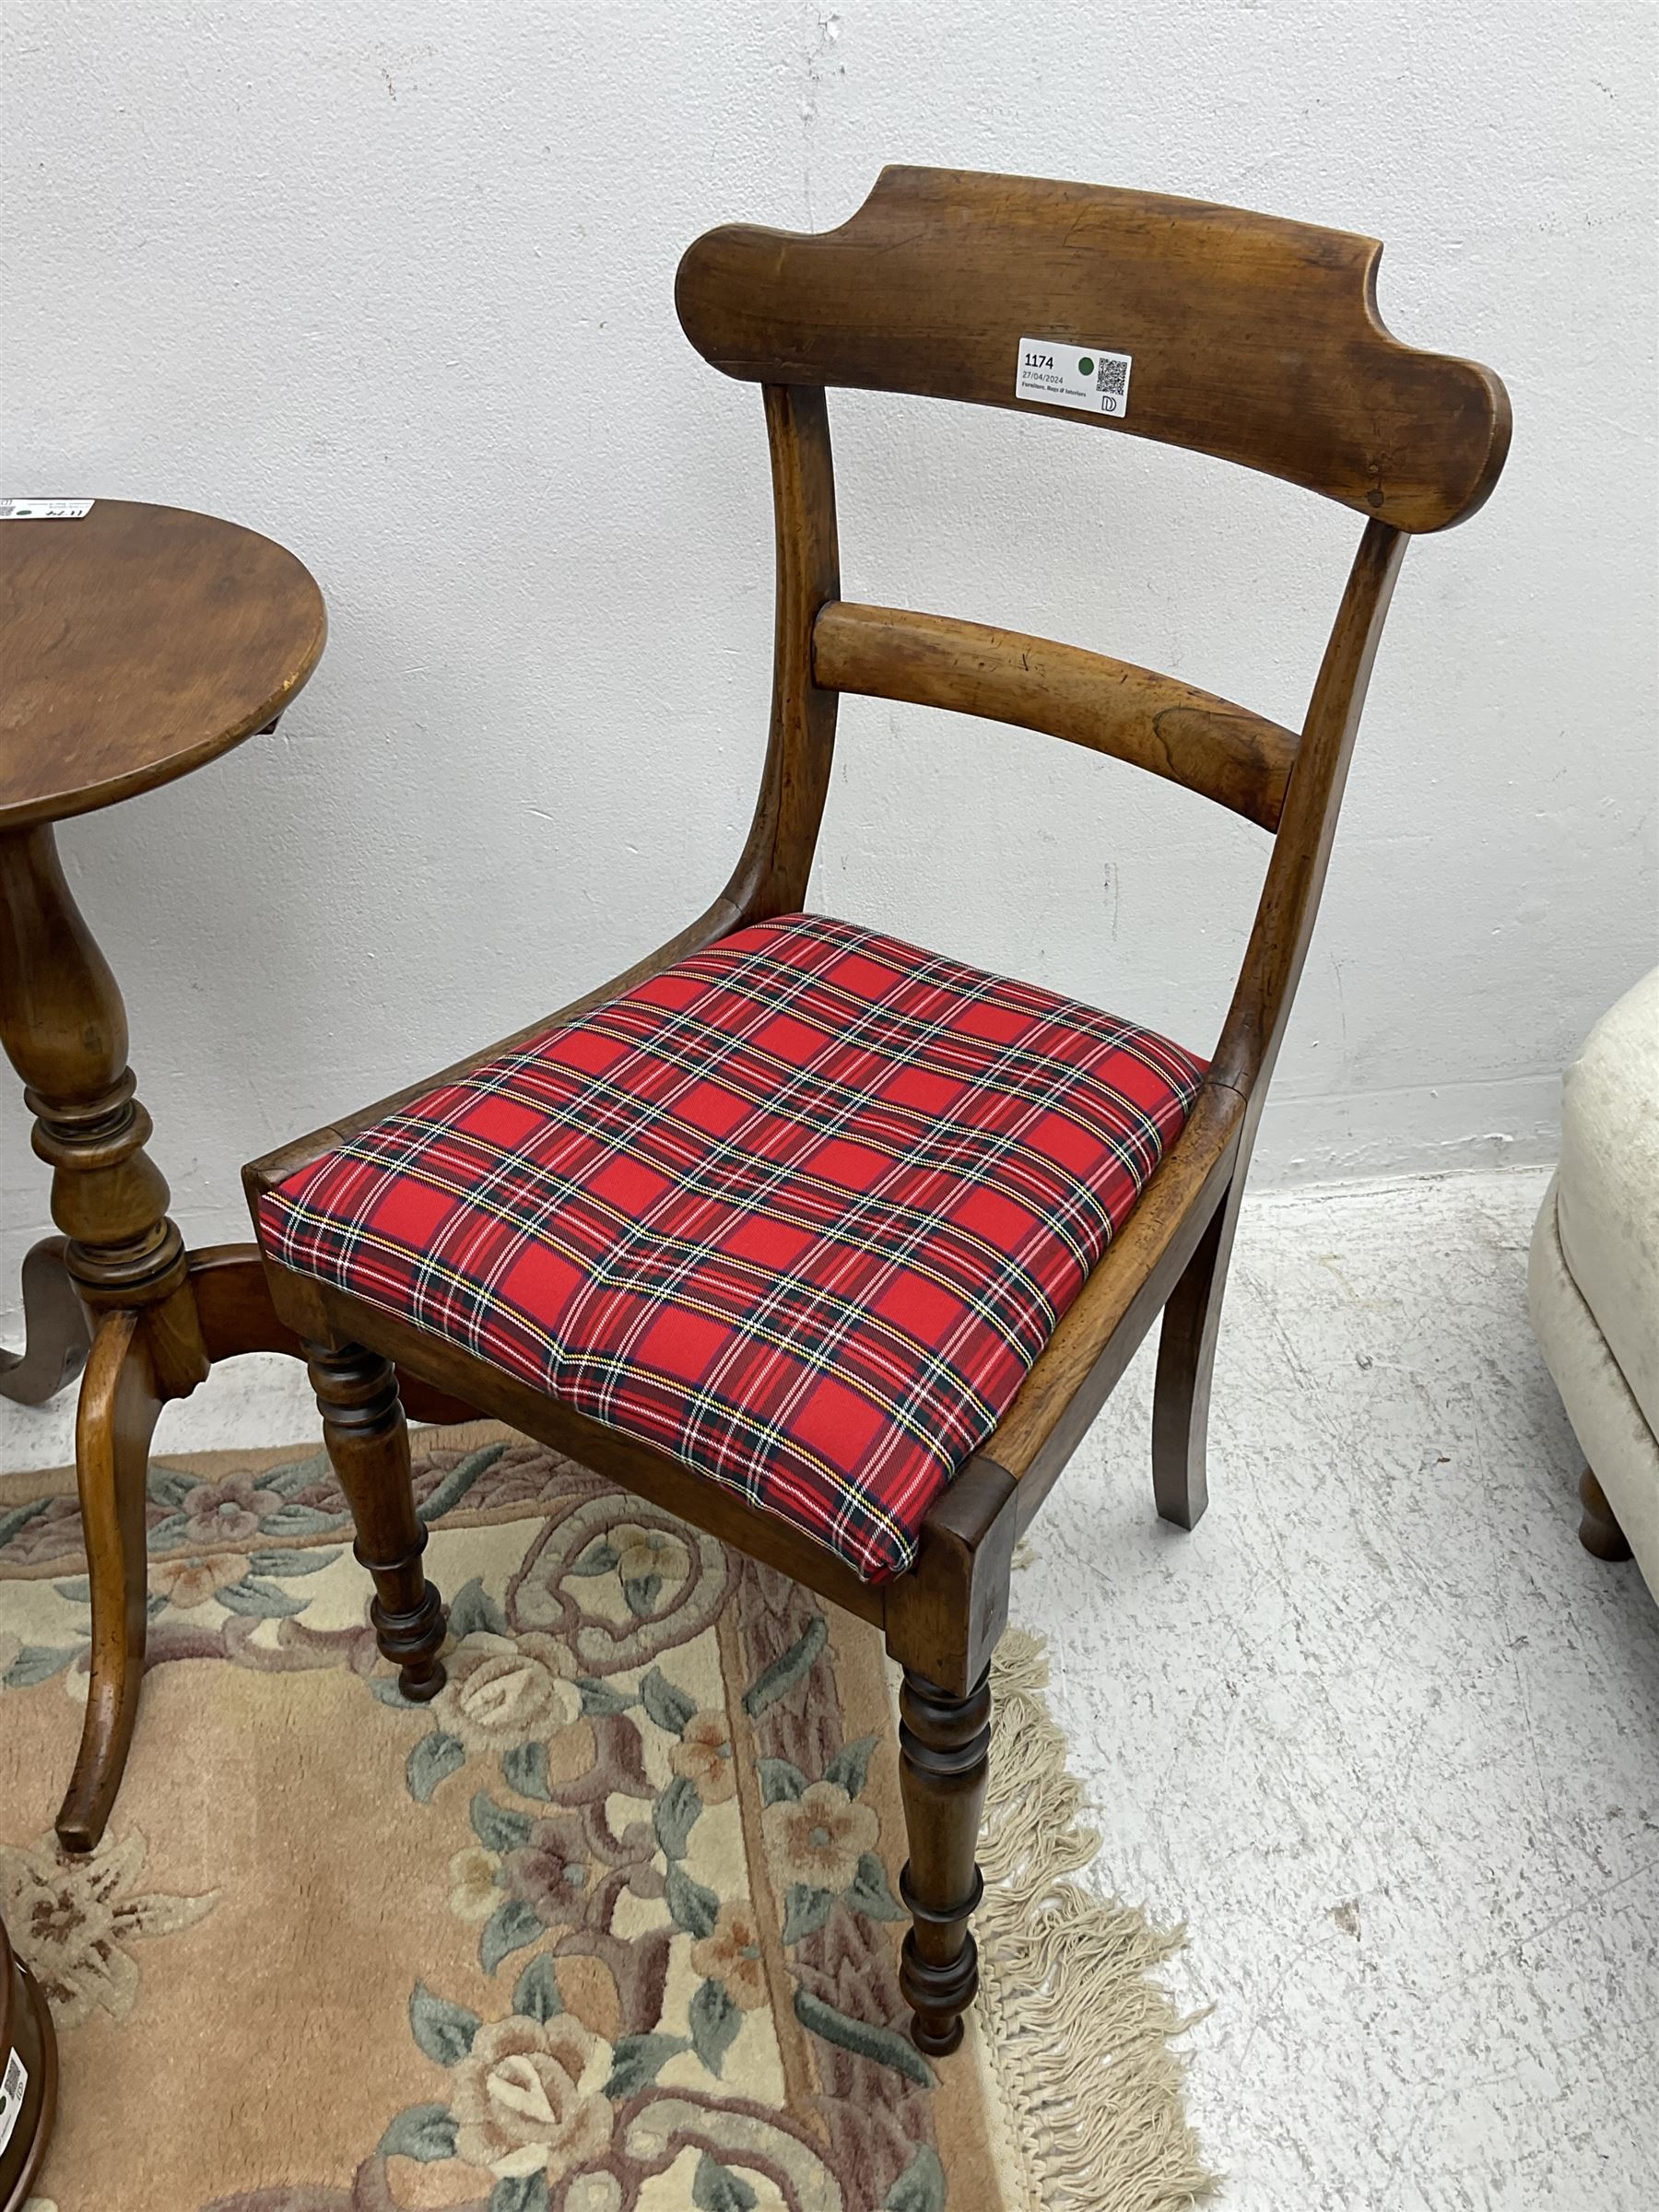 Pair of 19th century rosewood chairs with tartan upholstered drop-in seats (W46cm H88cm); 19th centu - Image 7 of 8